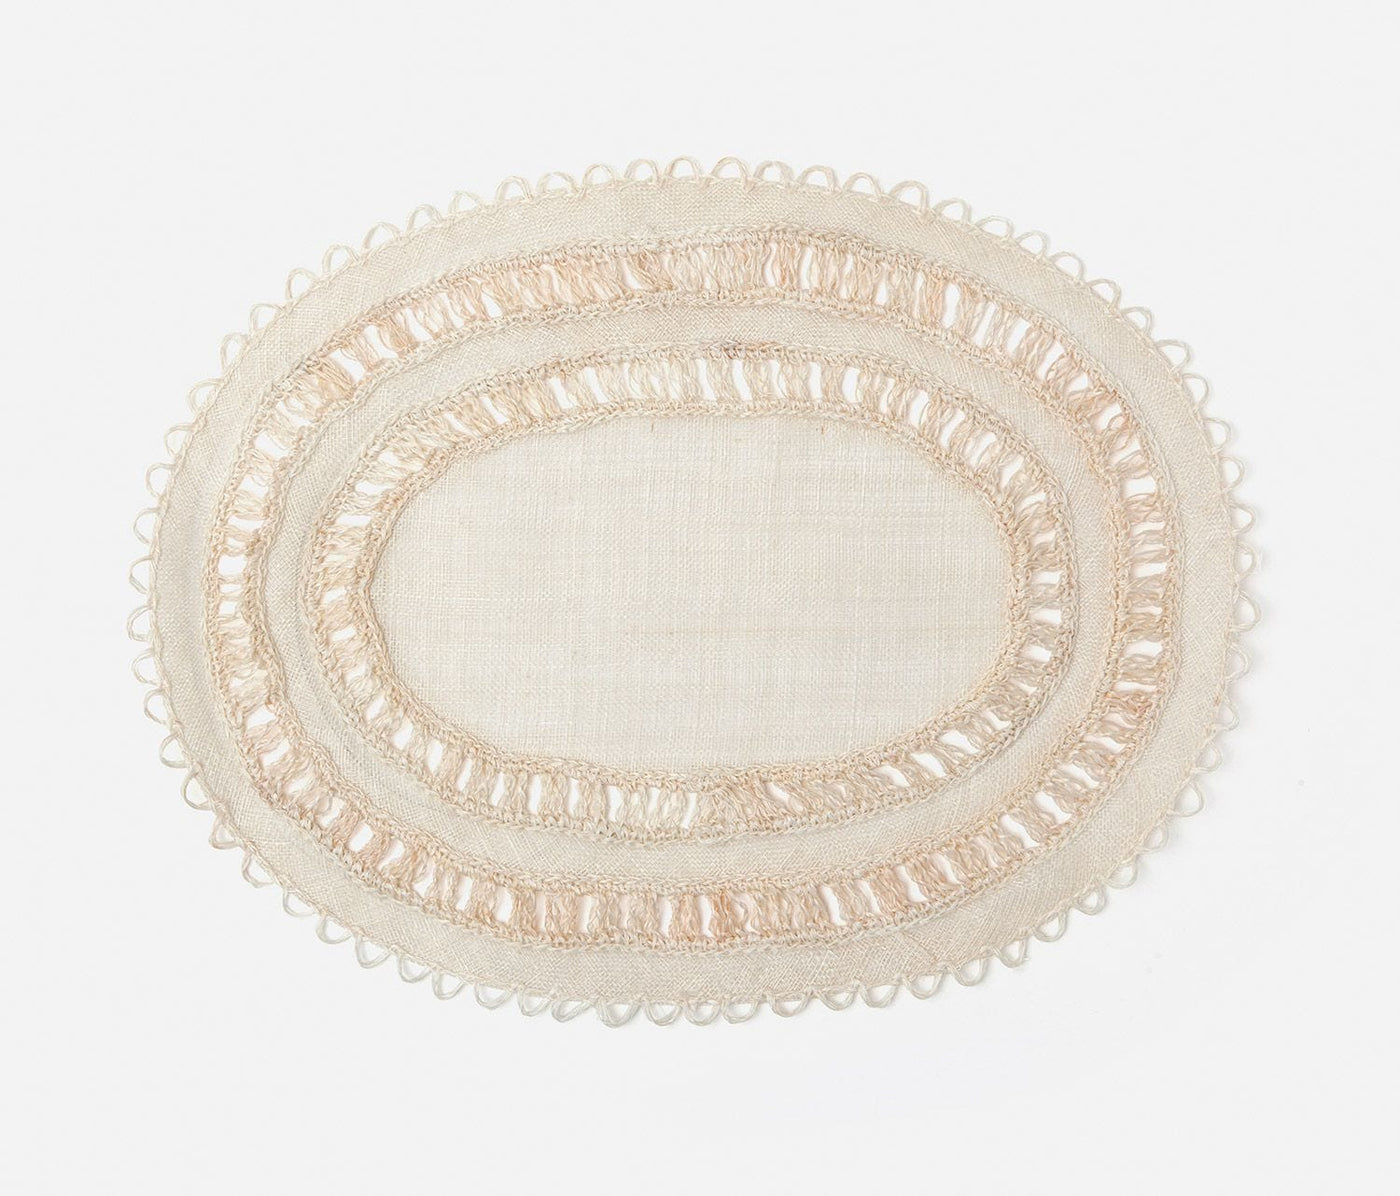 PLACEMAT BLEACHED ABACA (Available in 3 Sizes)